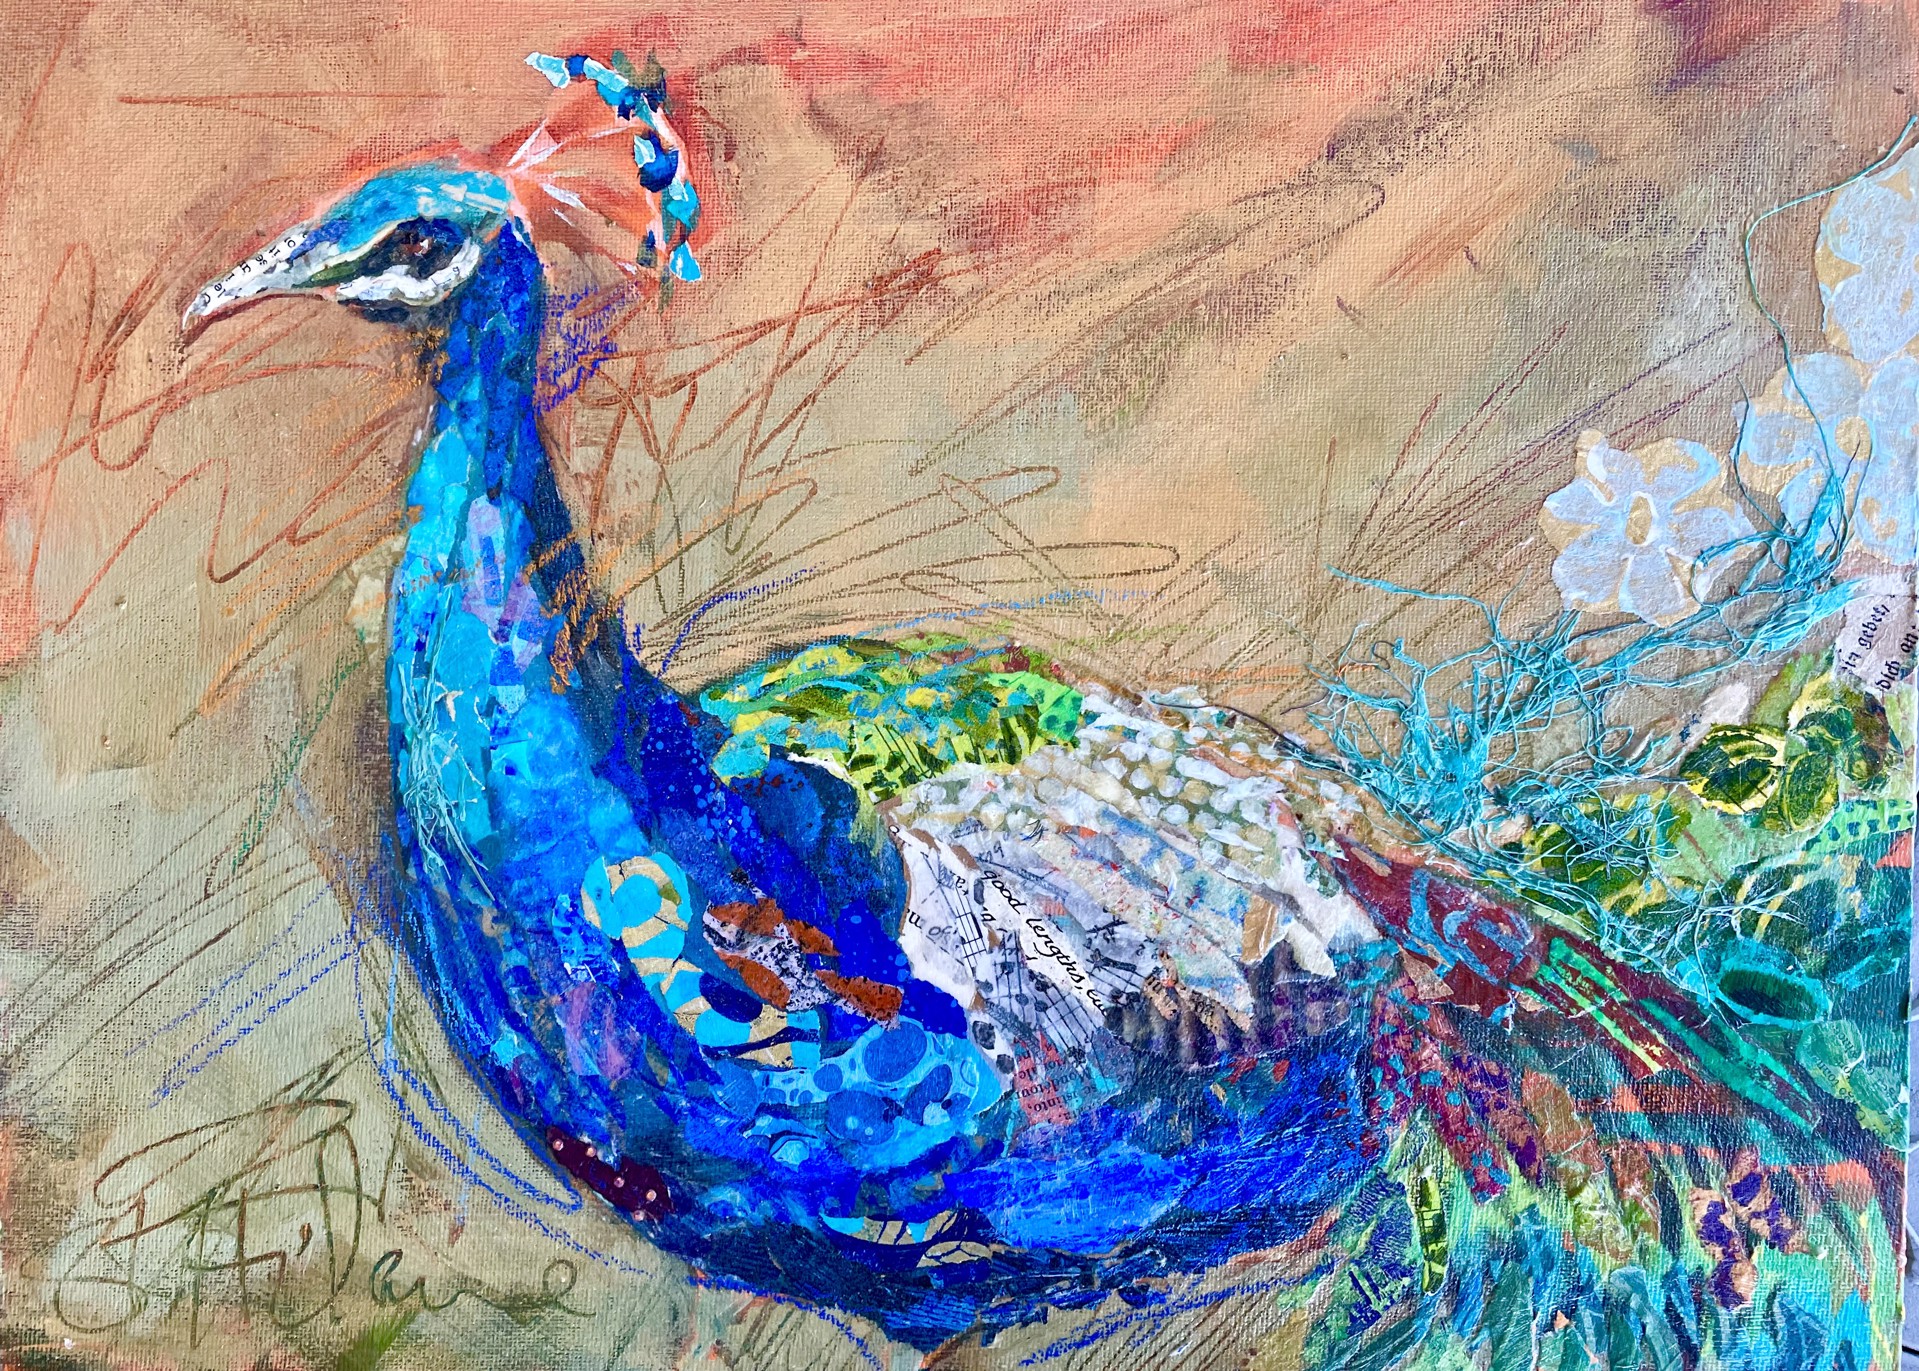 Peacock - SOLD by Elizabeth St. Hilaire